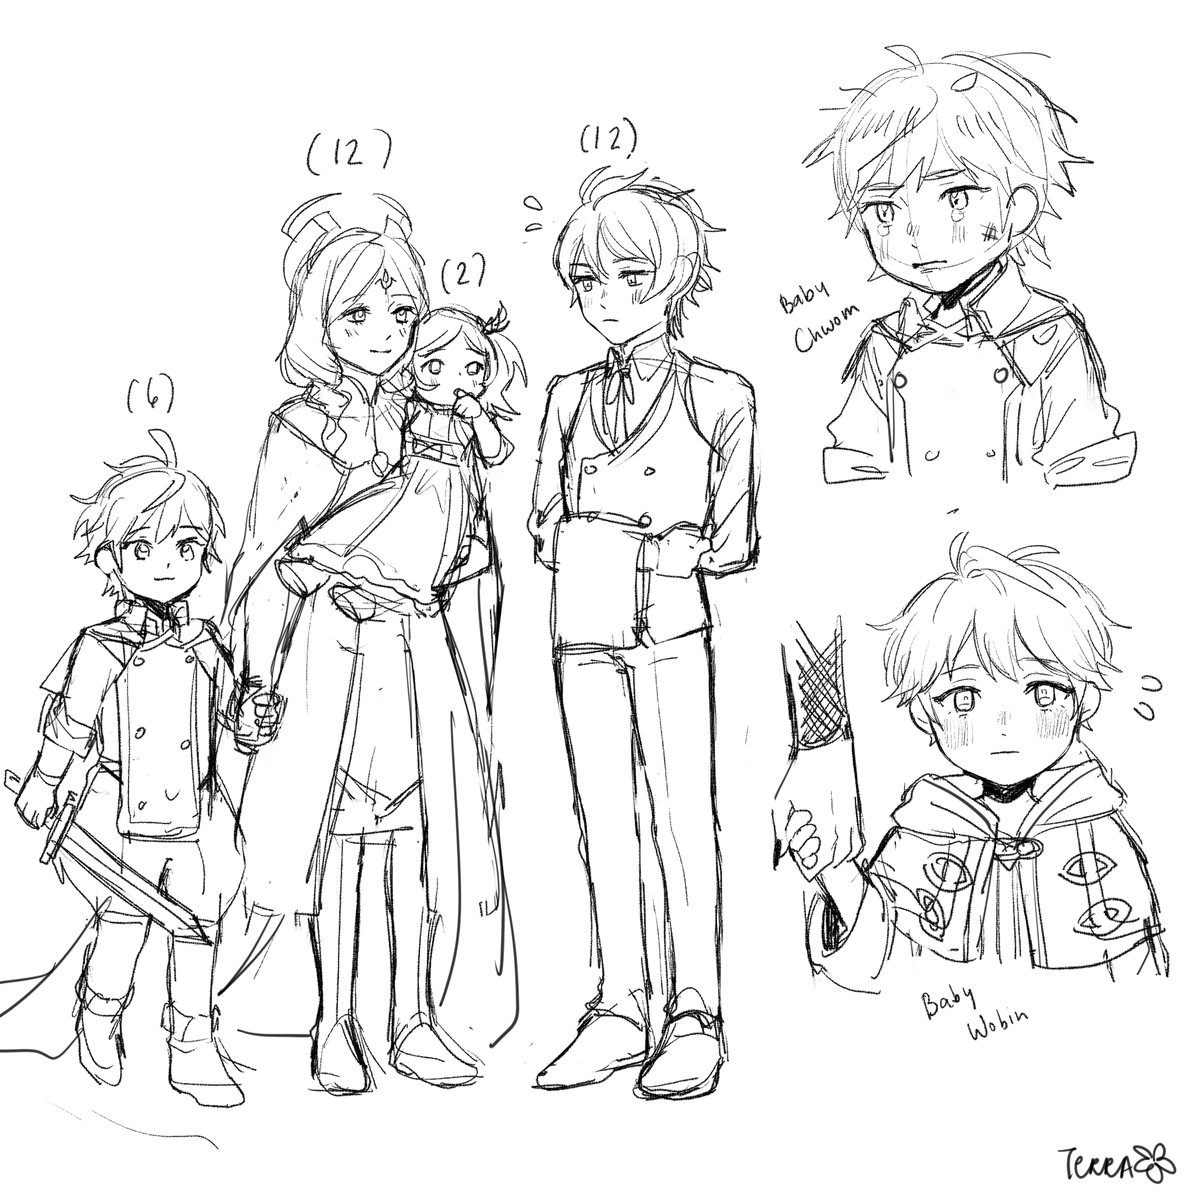 cries found my super old baby doodles from years ago 😭😭😭 now im so tempted to redraw aaaaa 